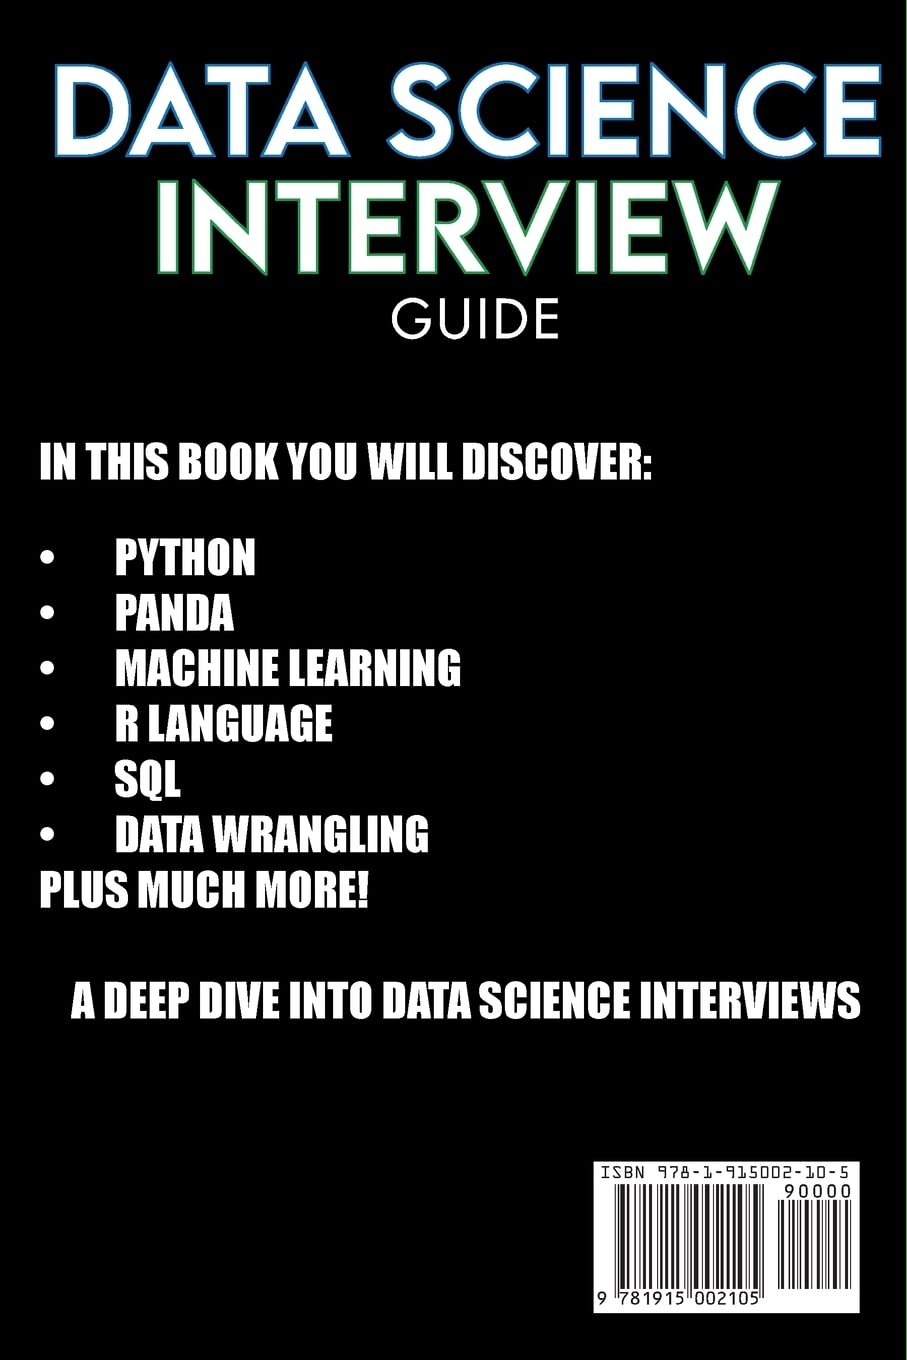 Data Science Interview - Prep for SQL, Panda, Python, R Language, Machine Learning, DBMS and RDBMS – And More – The Full Data Scientist Interview Handbook